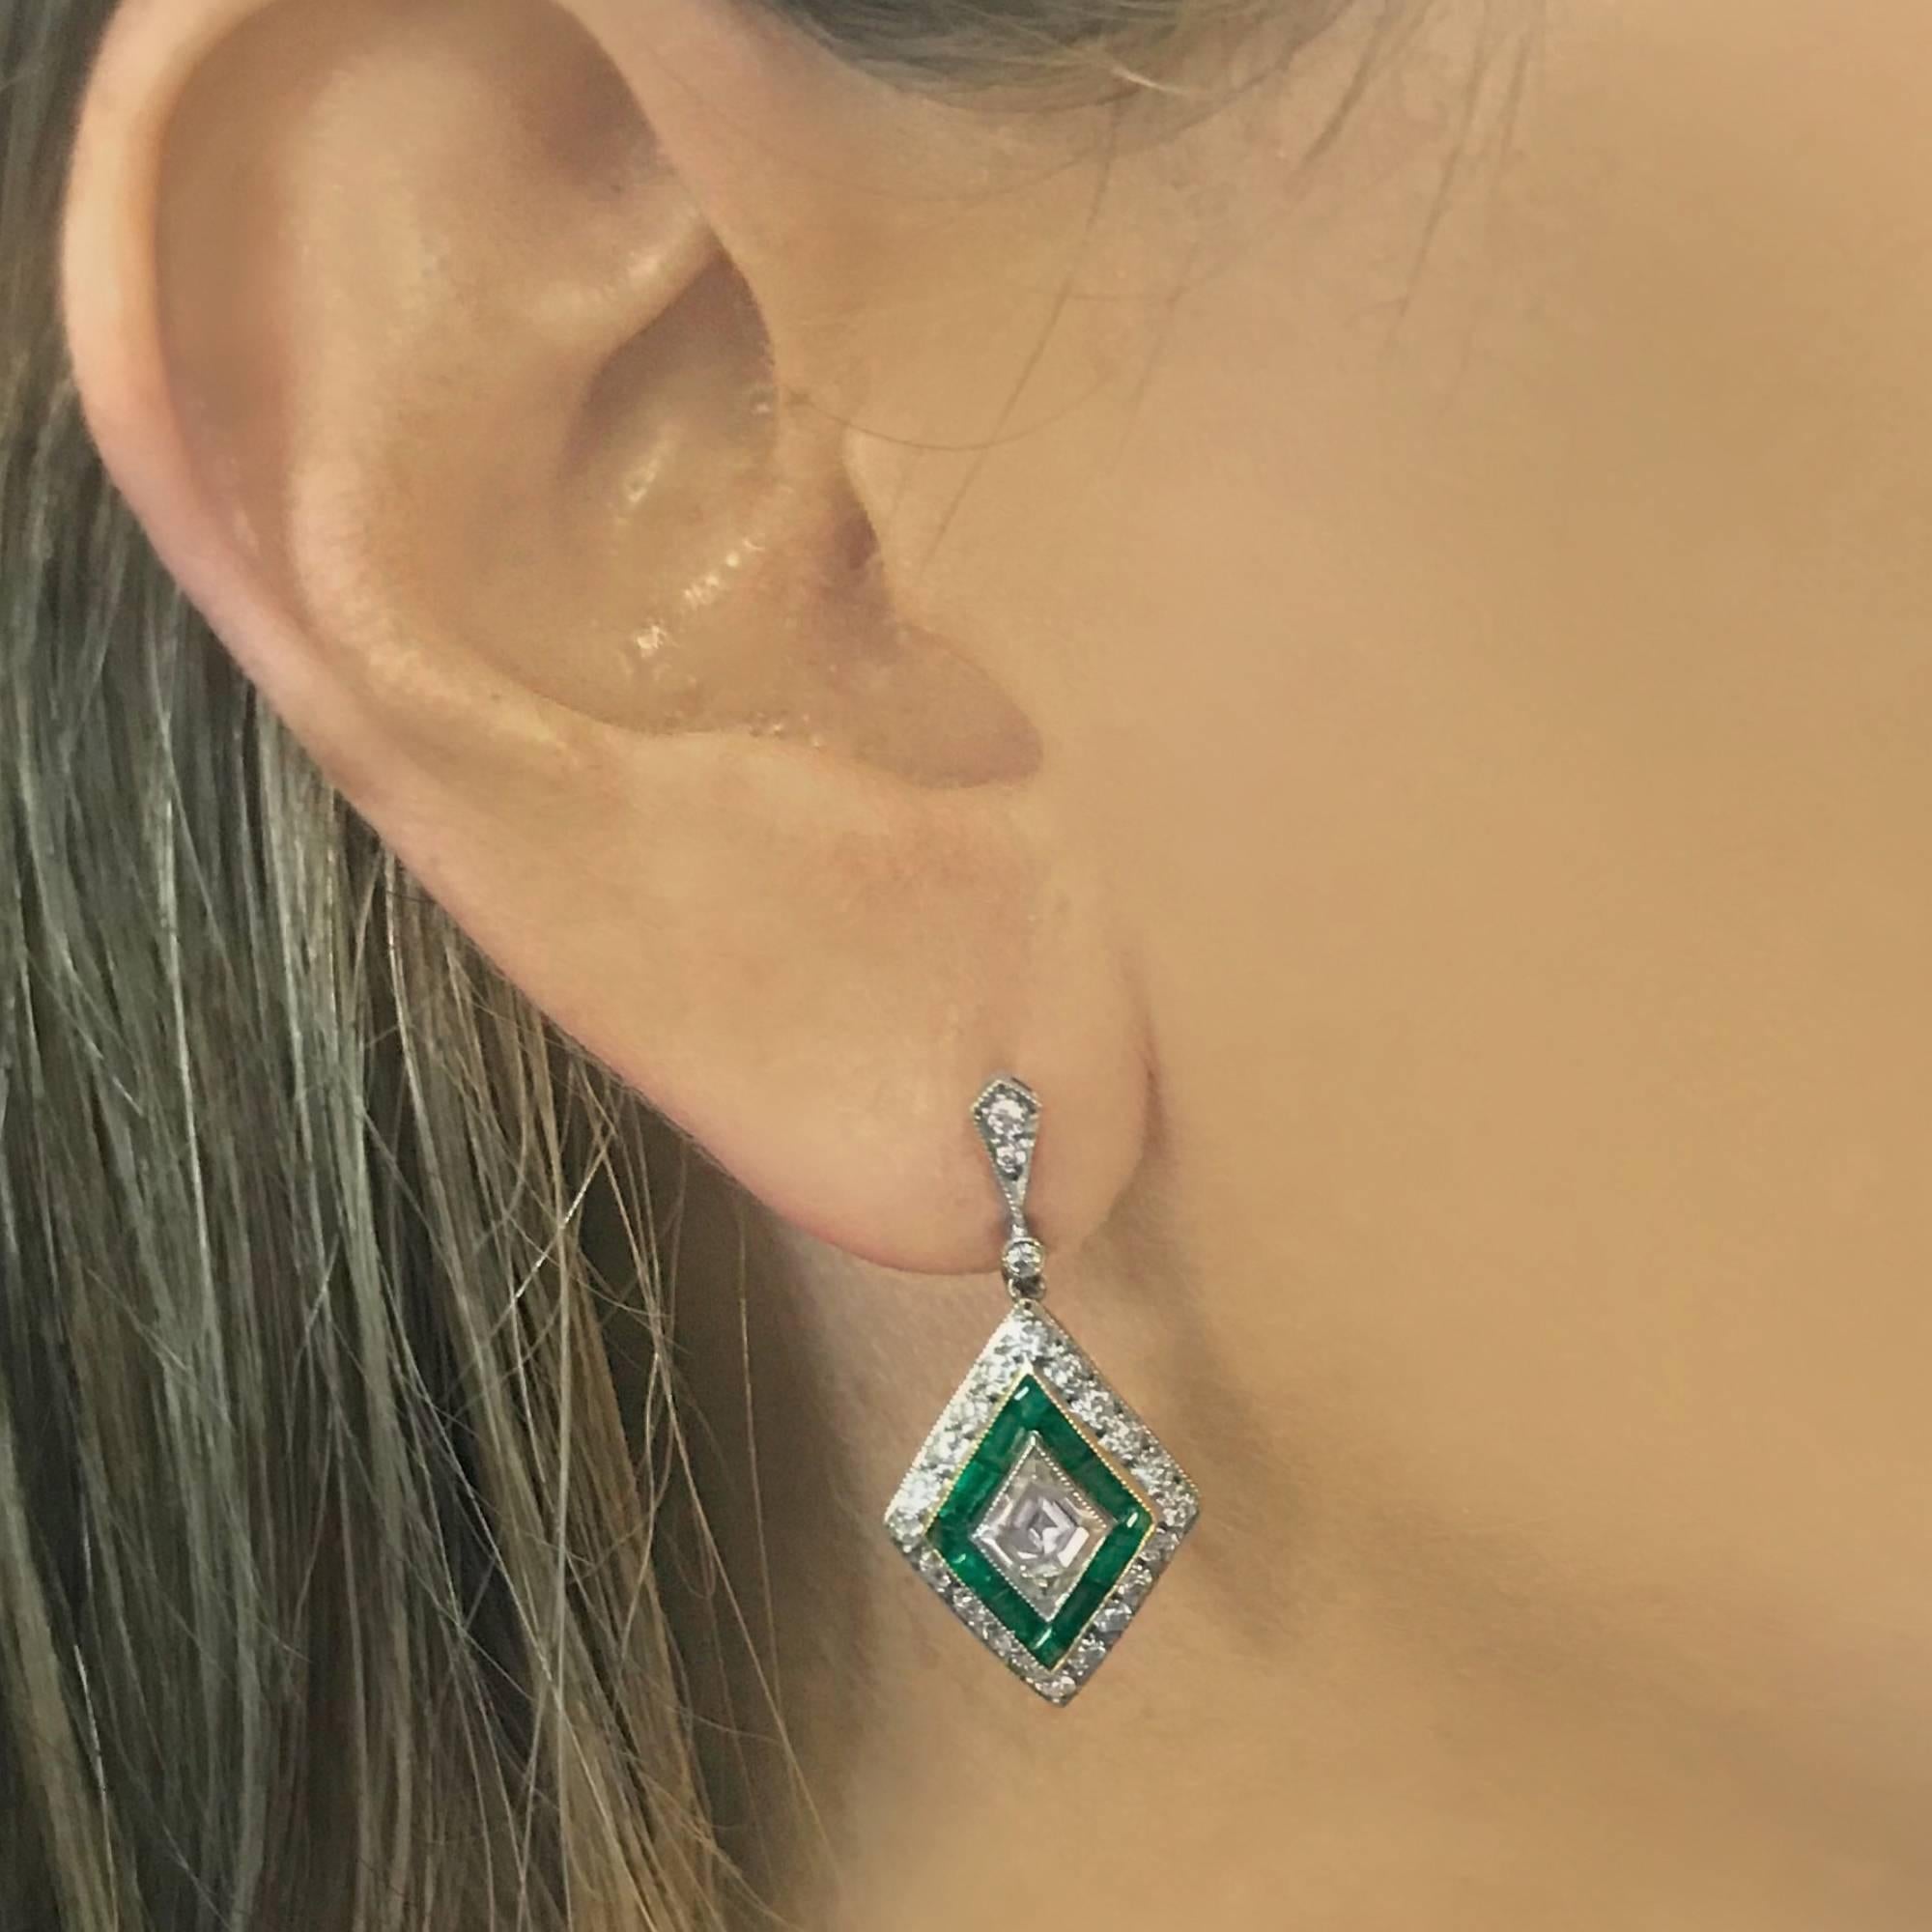 Stunning Art Deco inspired dangle earrings featuring 2 antique rhombus cut diamonds weighing approximately 1.10 carats total, G-H color, VS-SI clarity, set in platinum and framed with milgrain. The diamonds rest on a bed of 24 vivid green emerald